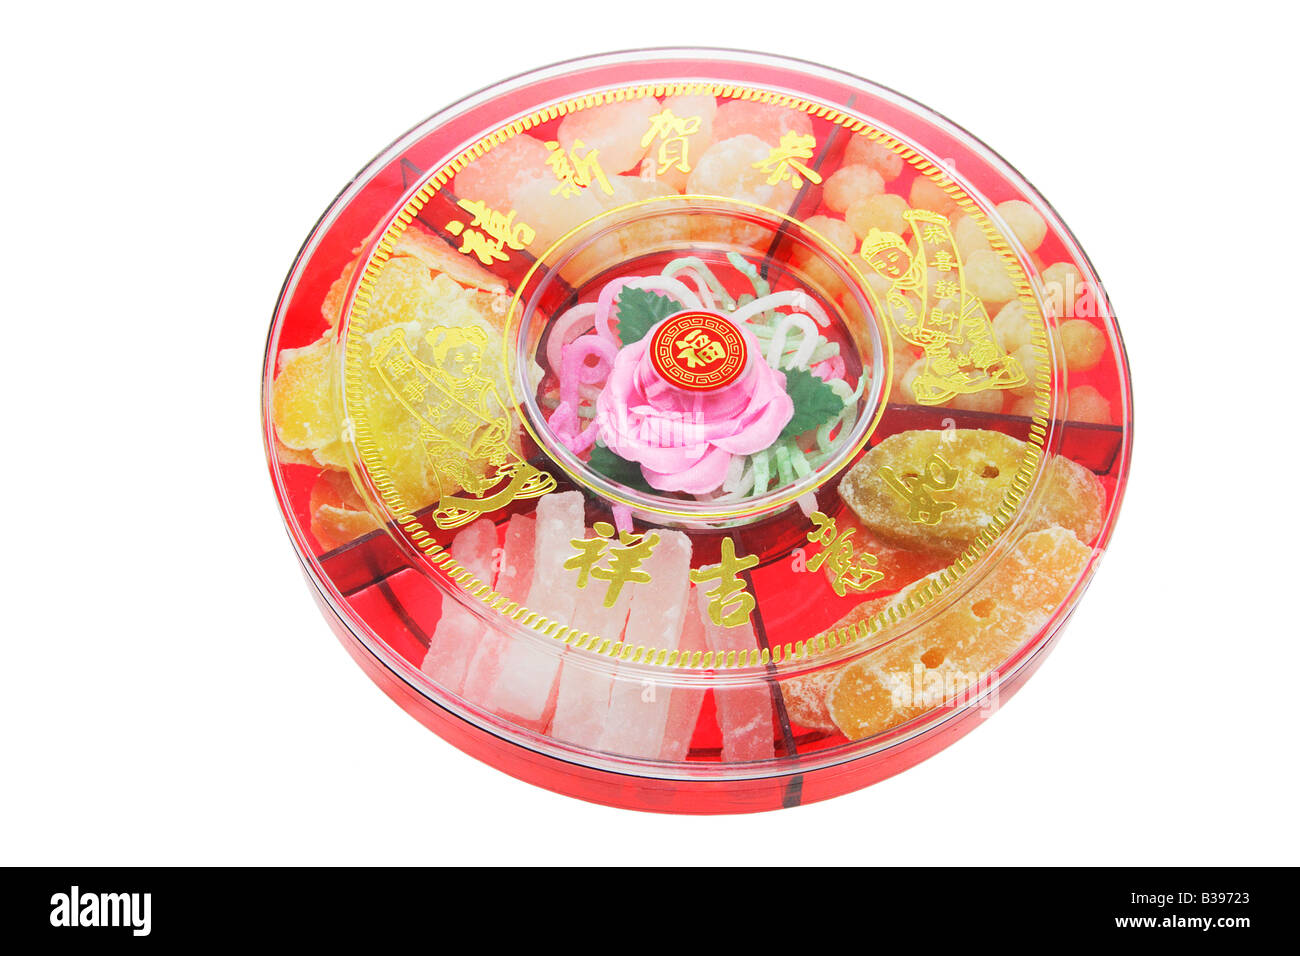 Chinese New Year Delicacies Stock Photo